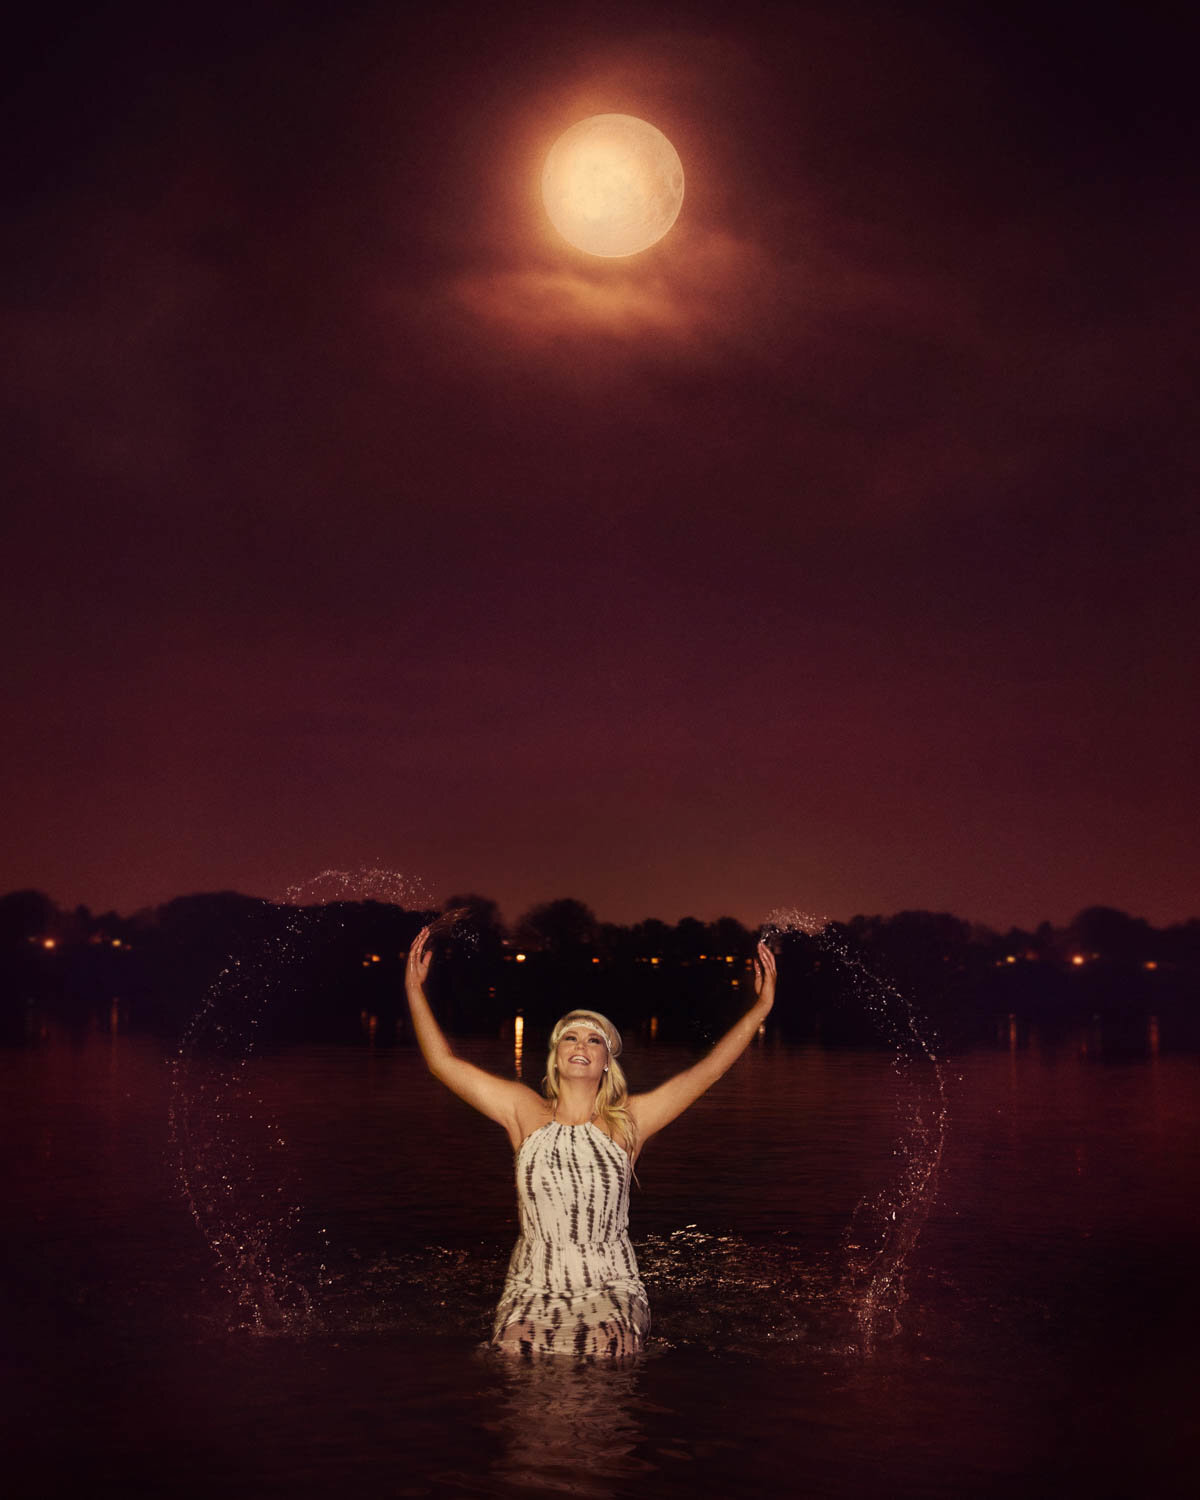 high school senior in lake at night with full moon